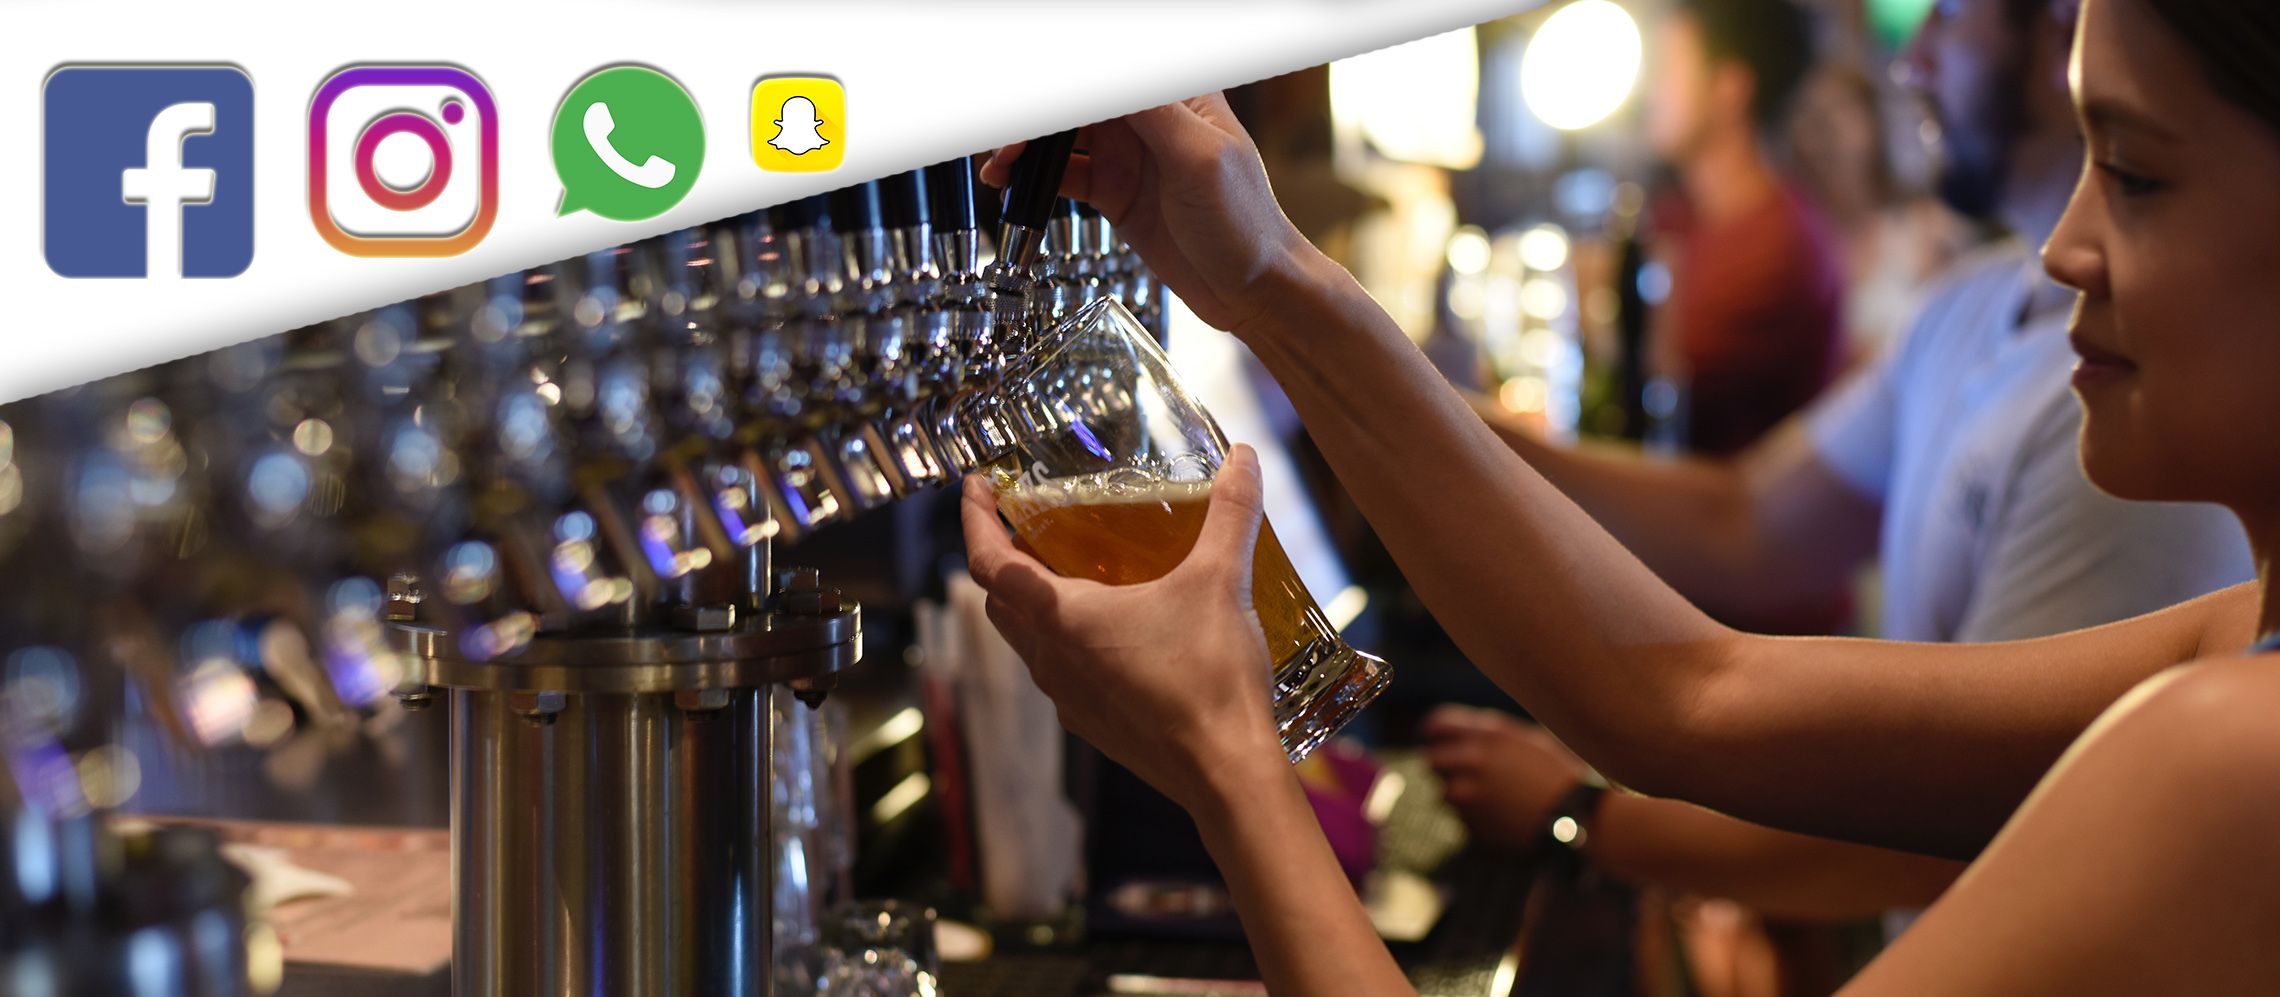 Photo for: How to Use Social Media Marketing to Boost Your Craft Beer Sales